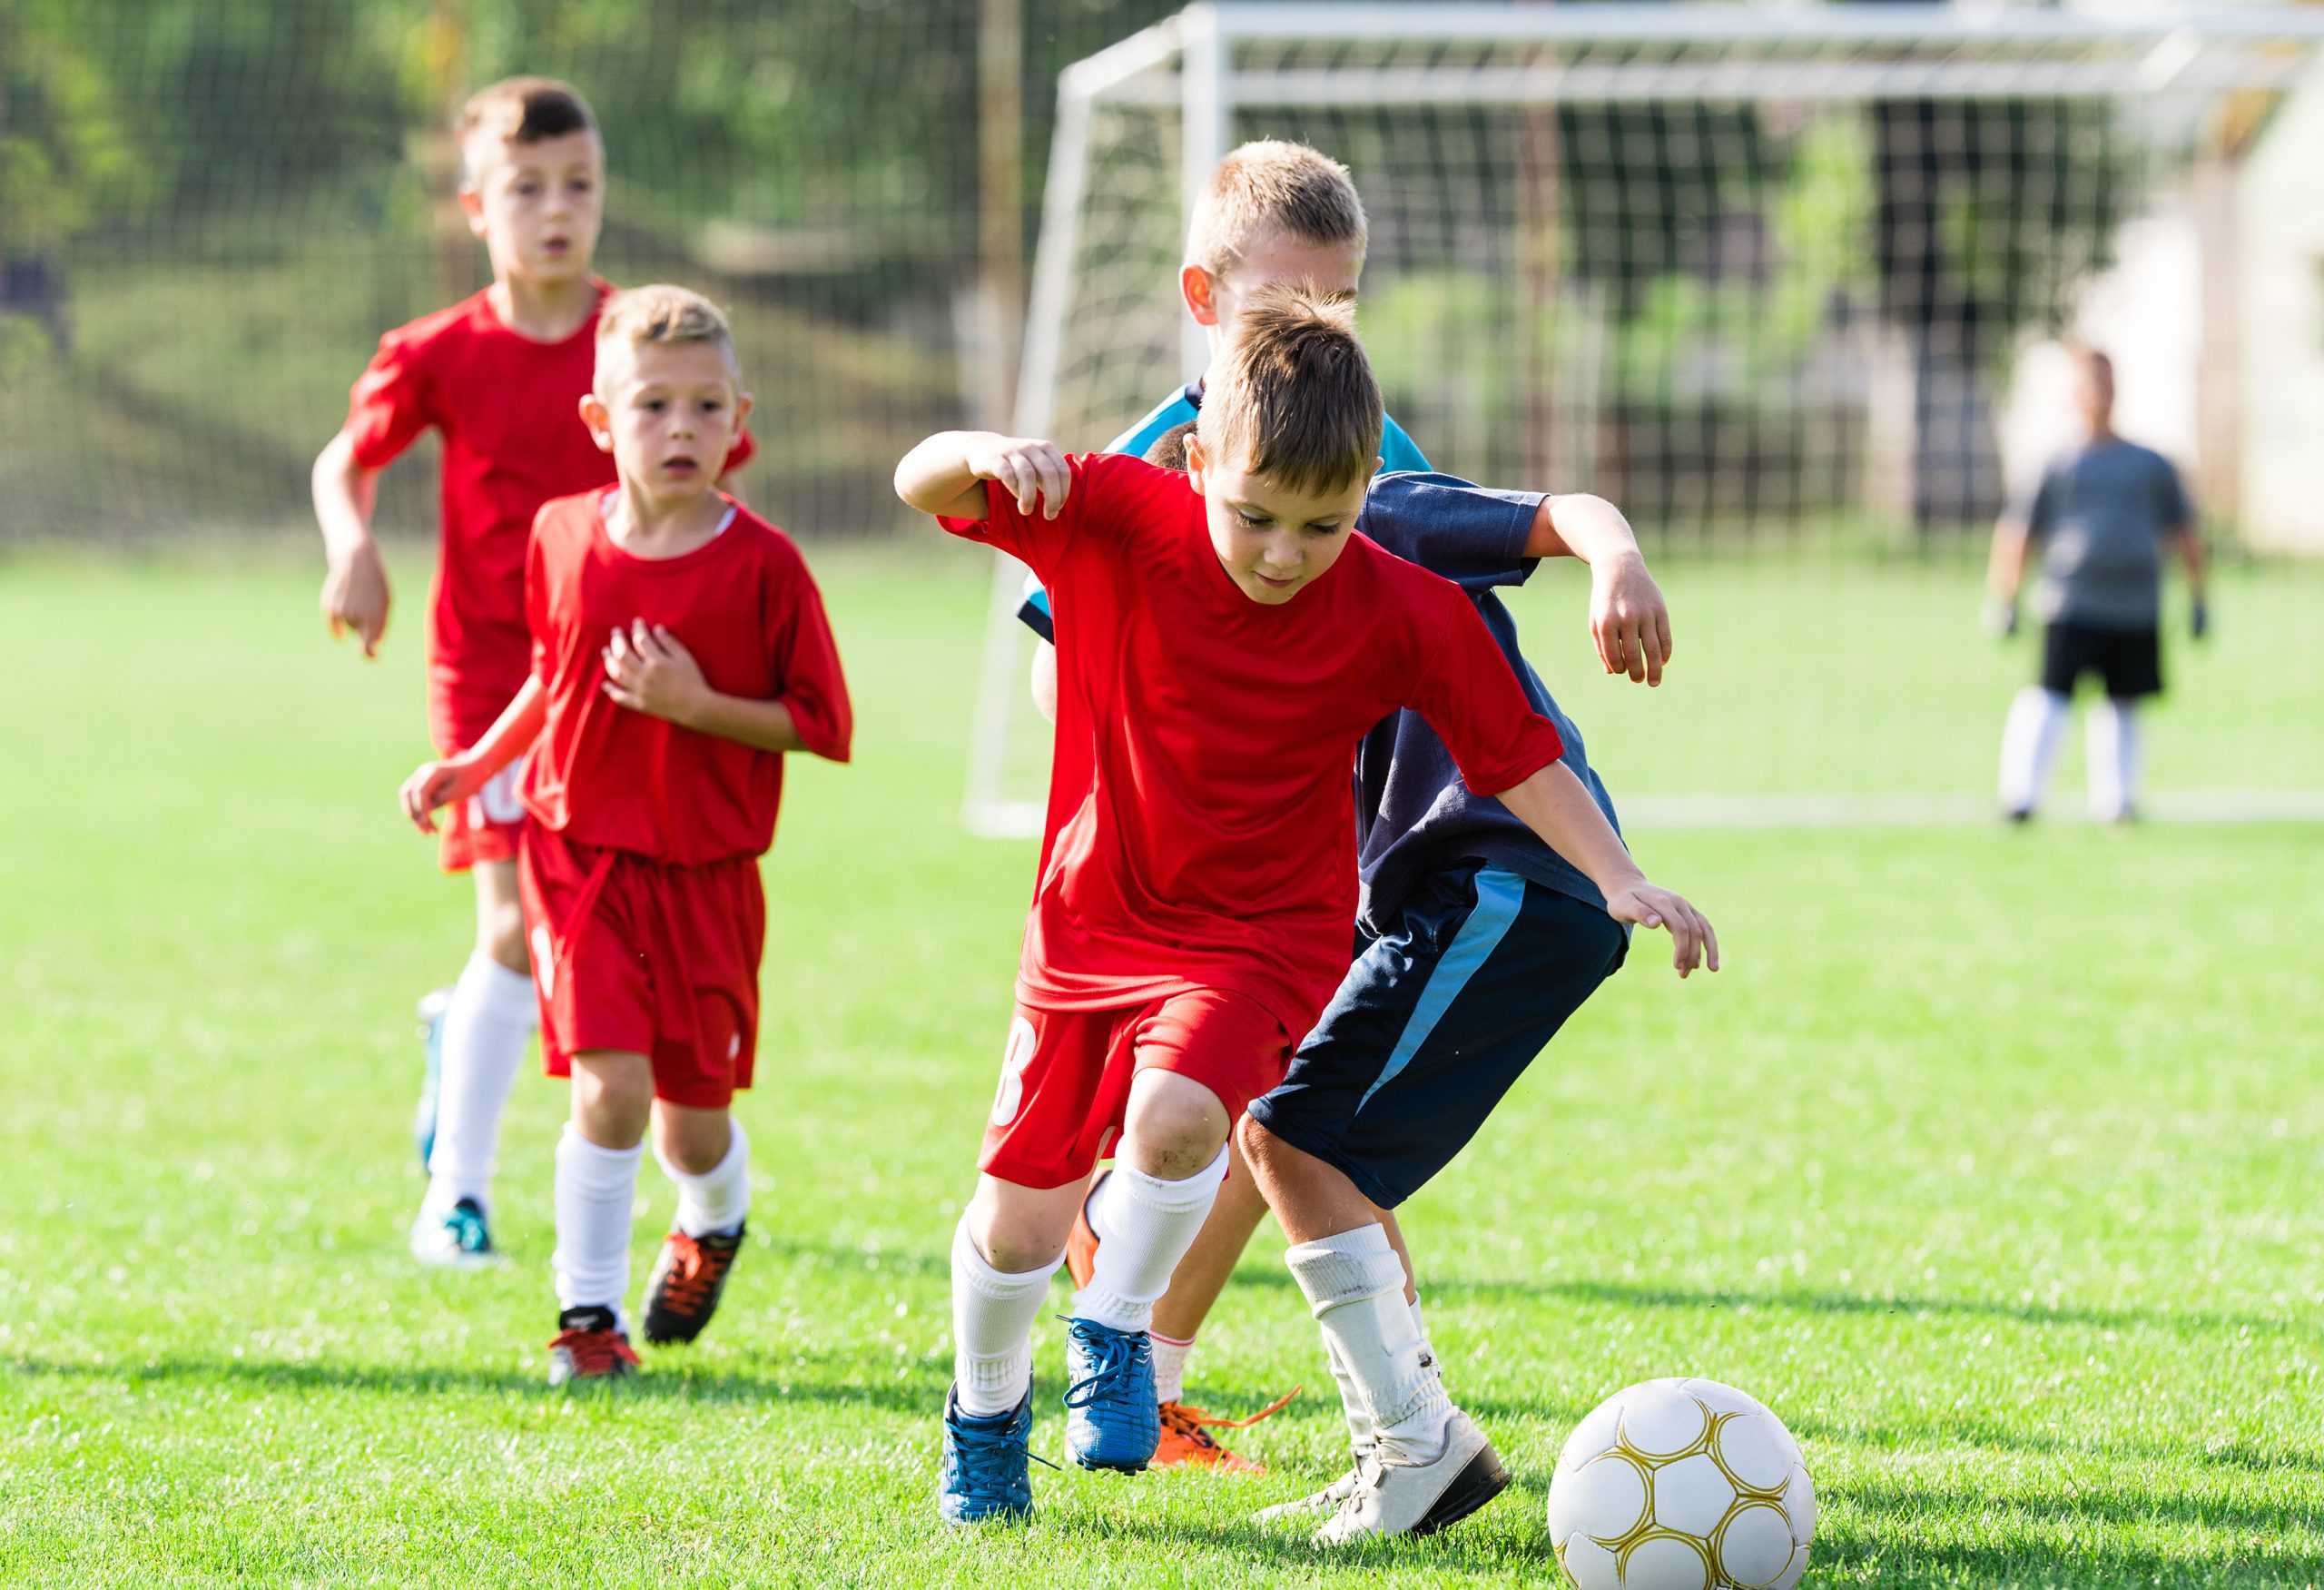 Types of Training at a Soccer Camp